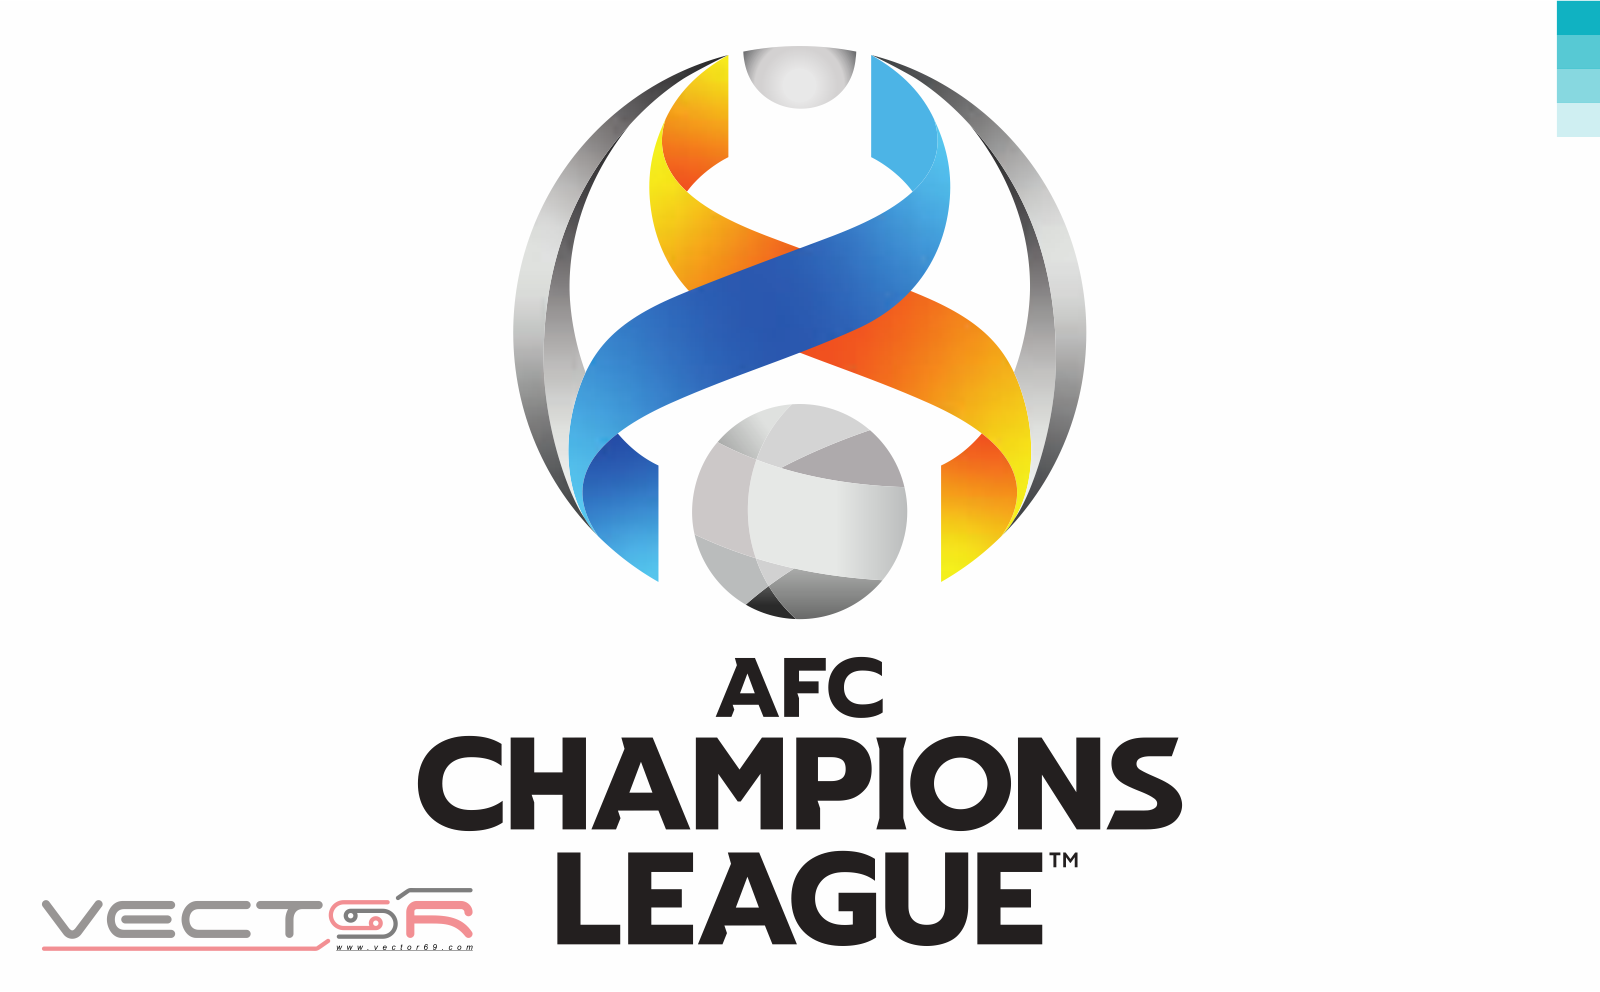 AFC Champions League (ACL) Logo - Download Vector File SVG (Scalable Vector Graphics)